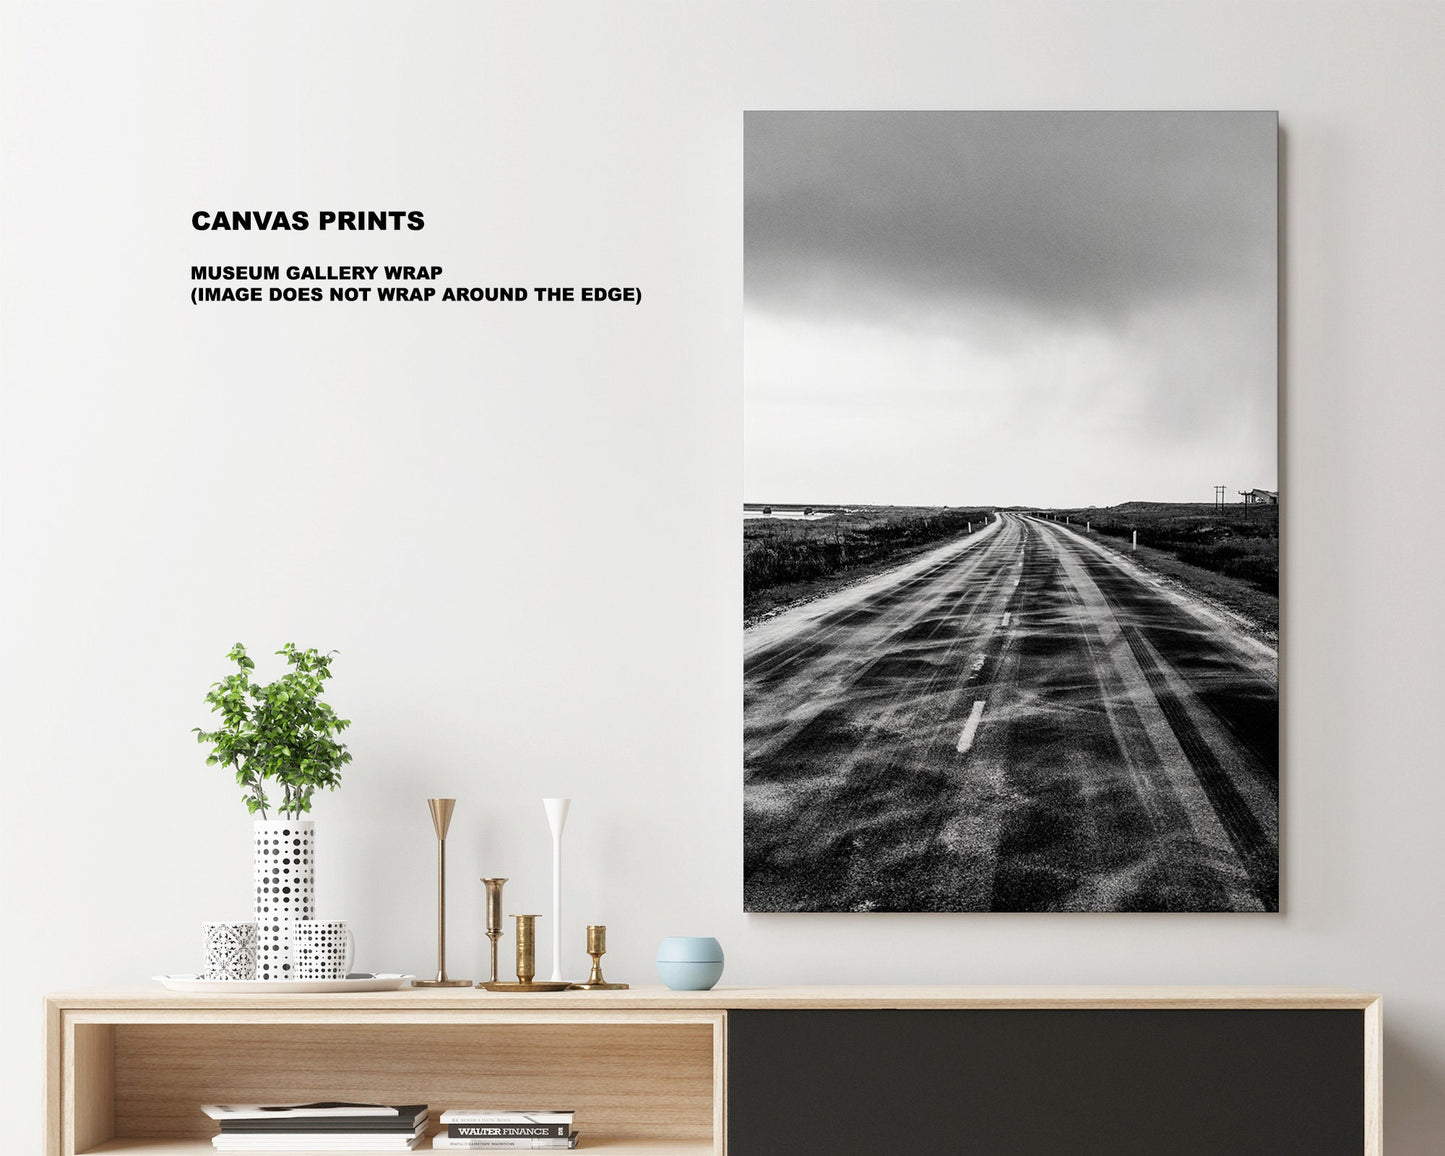 Black and White Road Print - Iceland Photography Print - Iceland Wall Art - Iceland Poster - Black and White Photography - Southern Iceland